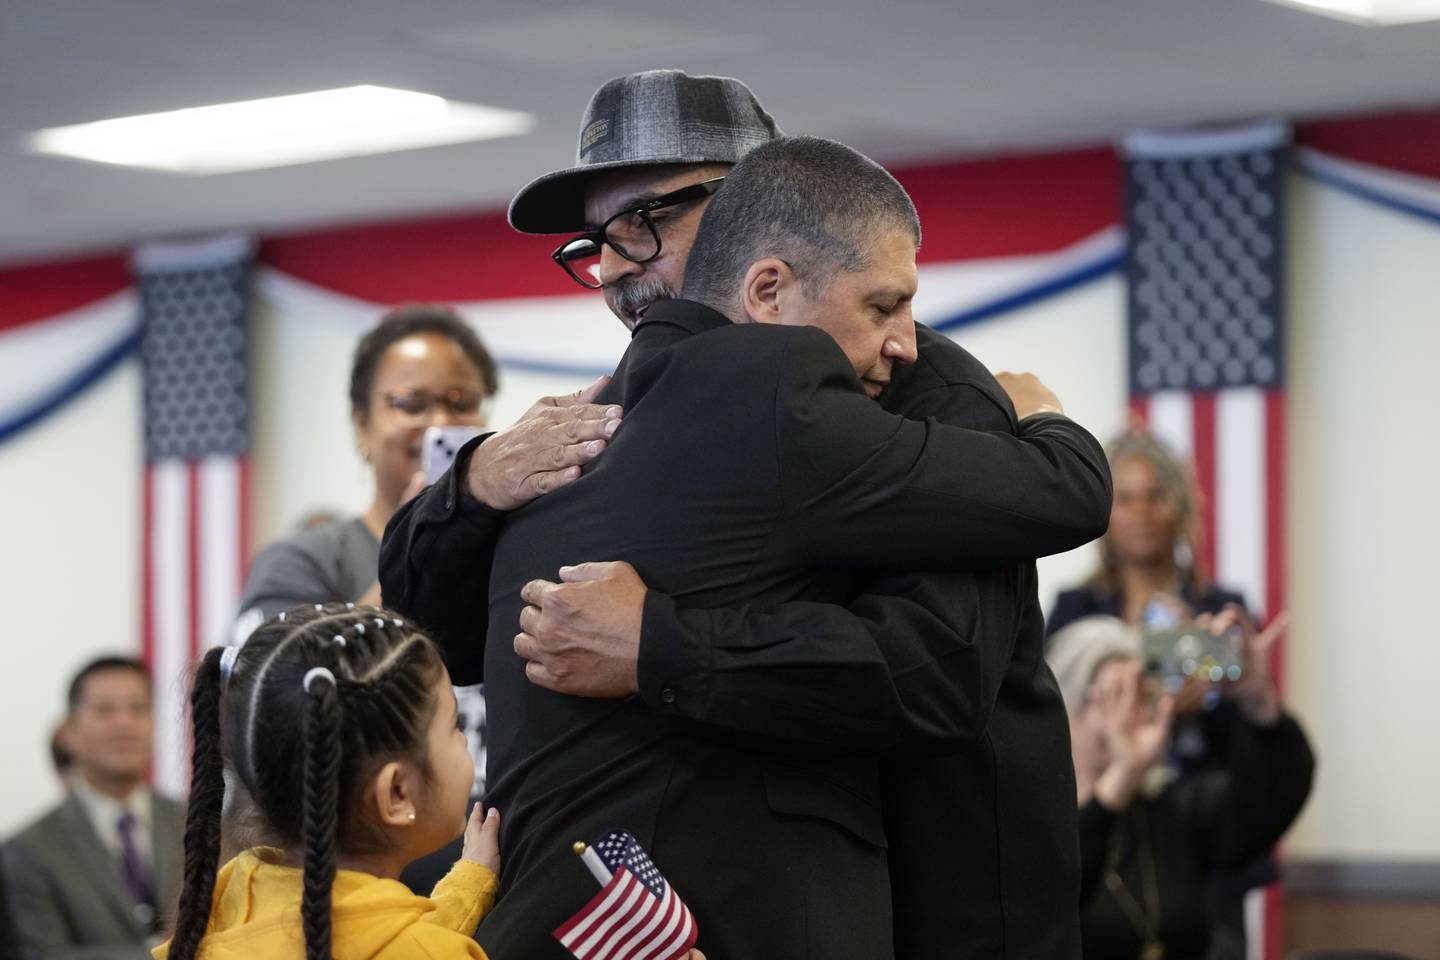 Deported veterans Mauricio Hernandez Mata, center right, and Leonel Contreras embrace after being sworn in as U.S. citizens at a special naturalization ceremony Wednesday, Feb. 8, 2023, in San Diego.